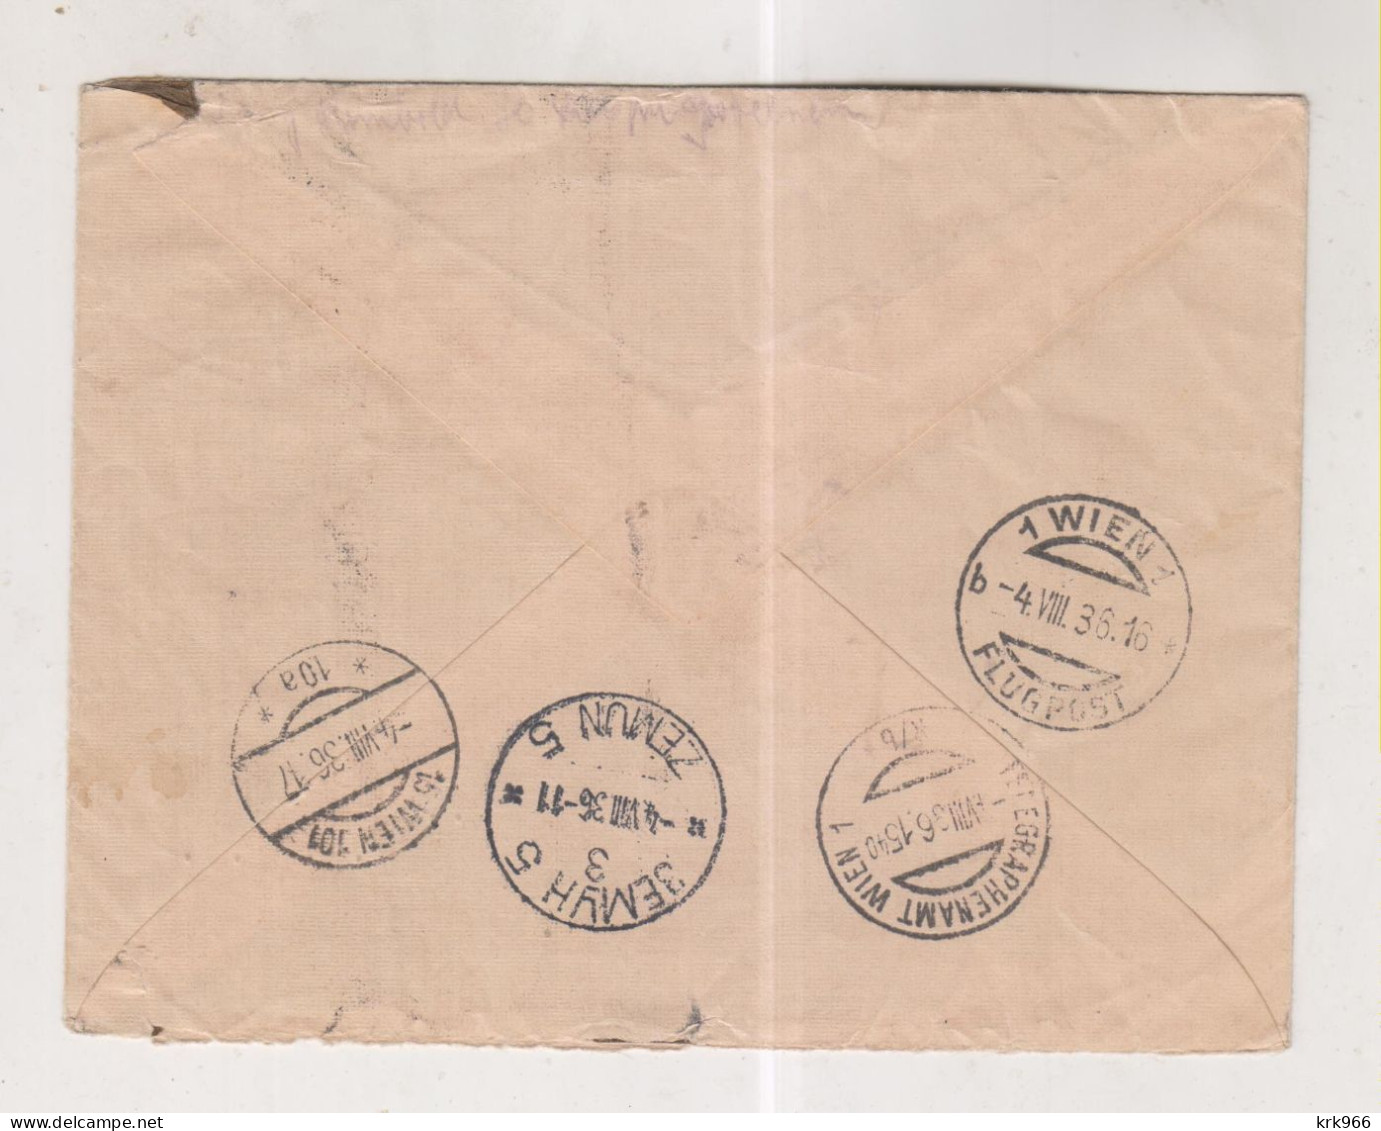 YUGOSLAVIA CELJE1936  Registered Airmail Cover To Austria - Covers & Documents